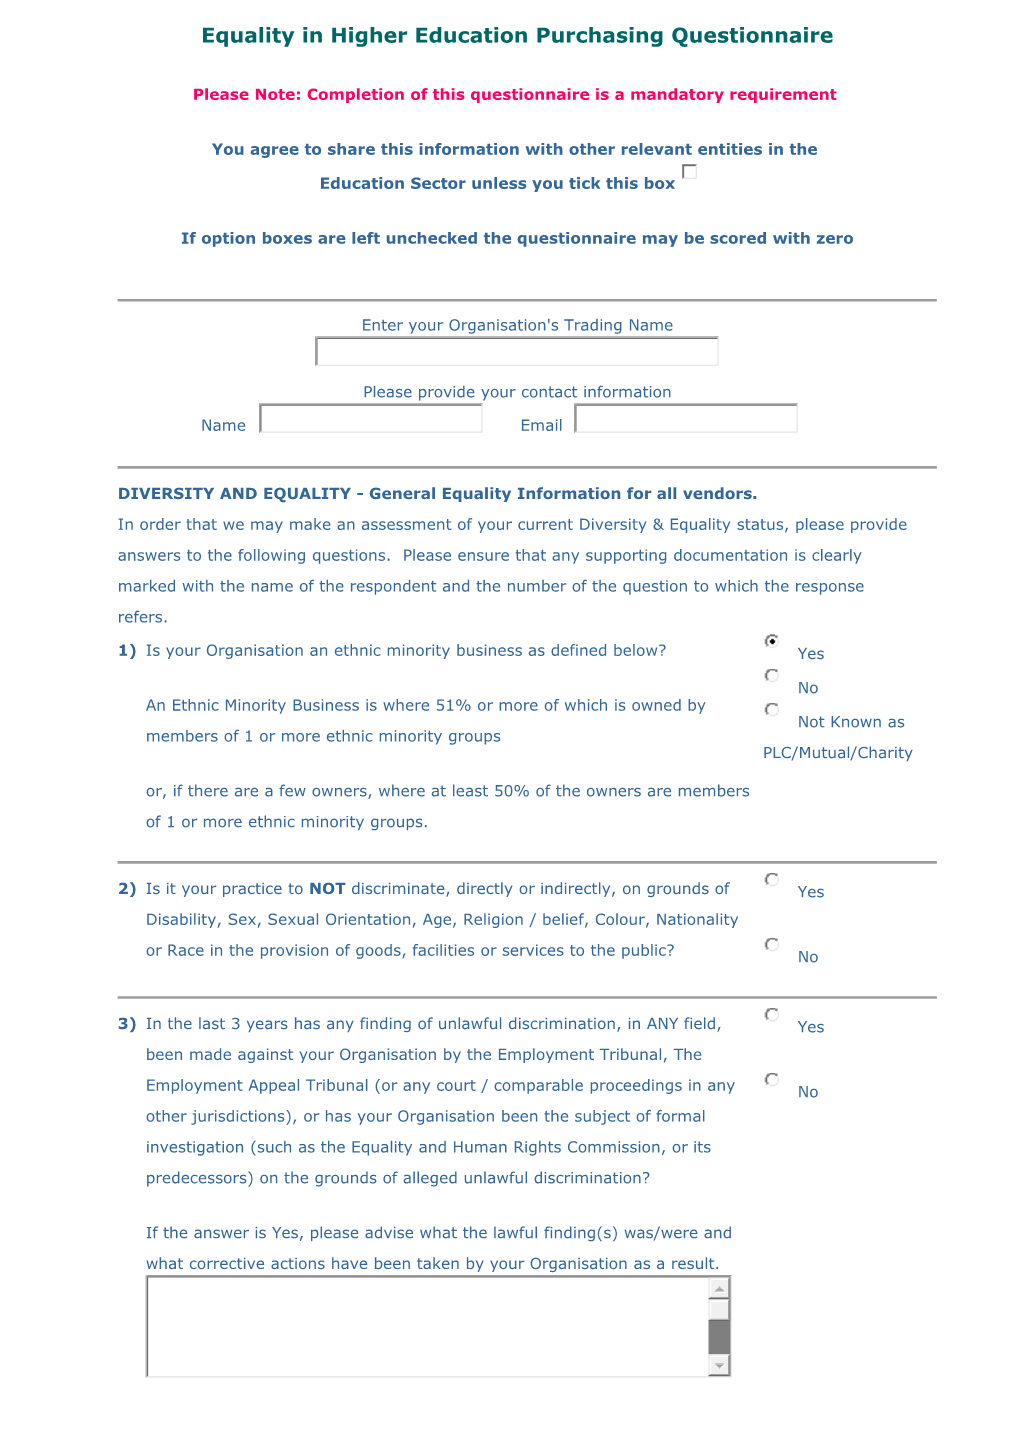 Equality in Higher Education Purchasing Questionnaire